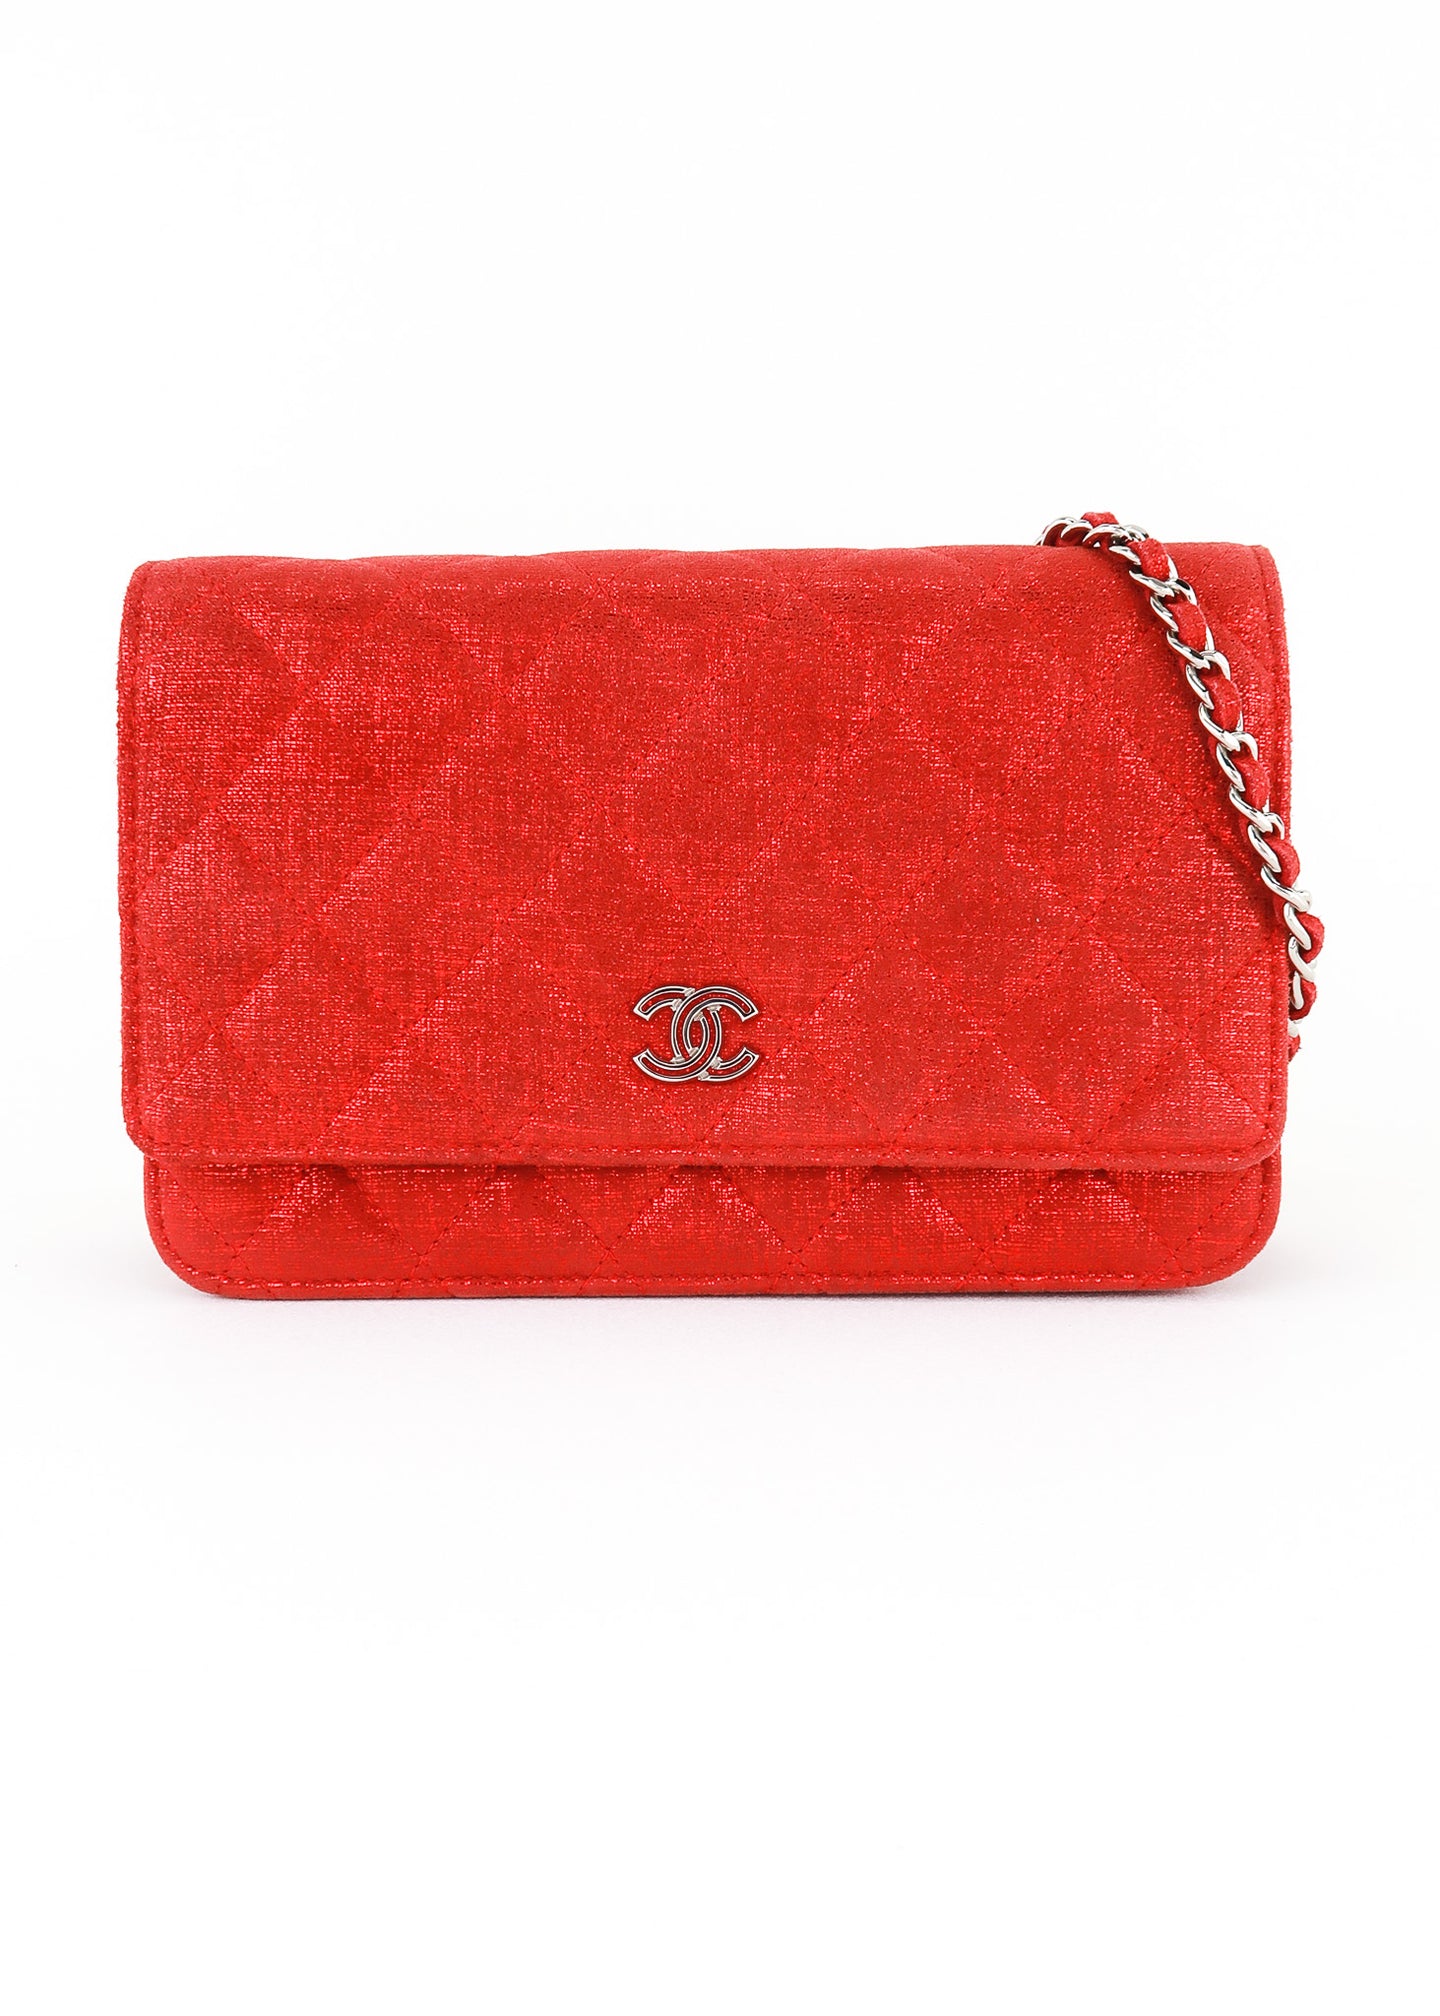 Chanel Wallet On Chain WOC Red  THE PURSE AFFAIR